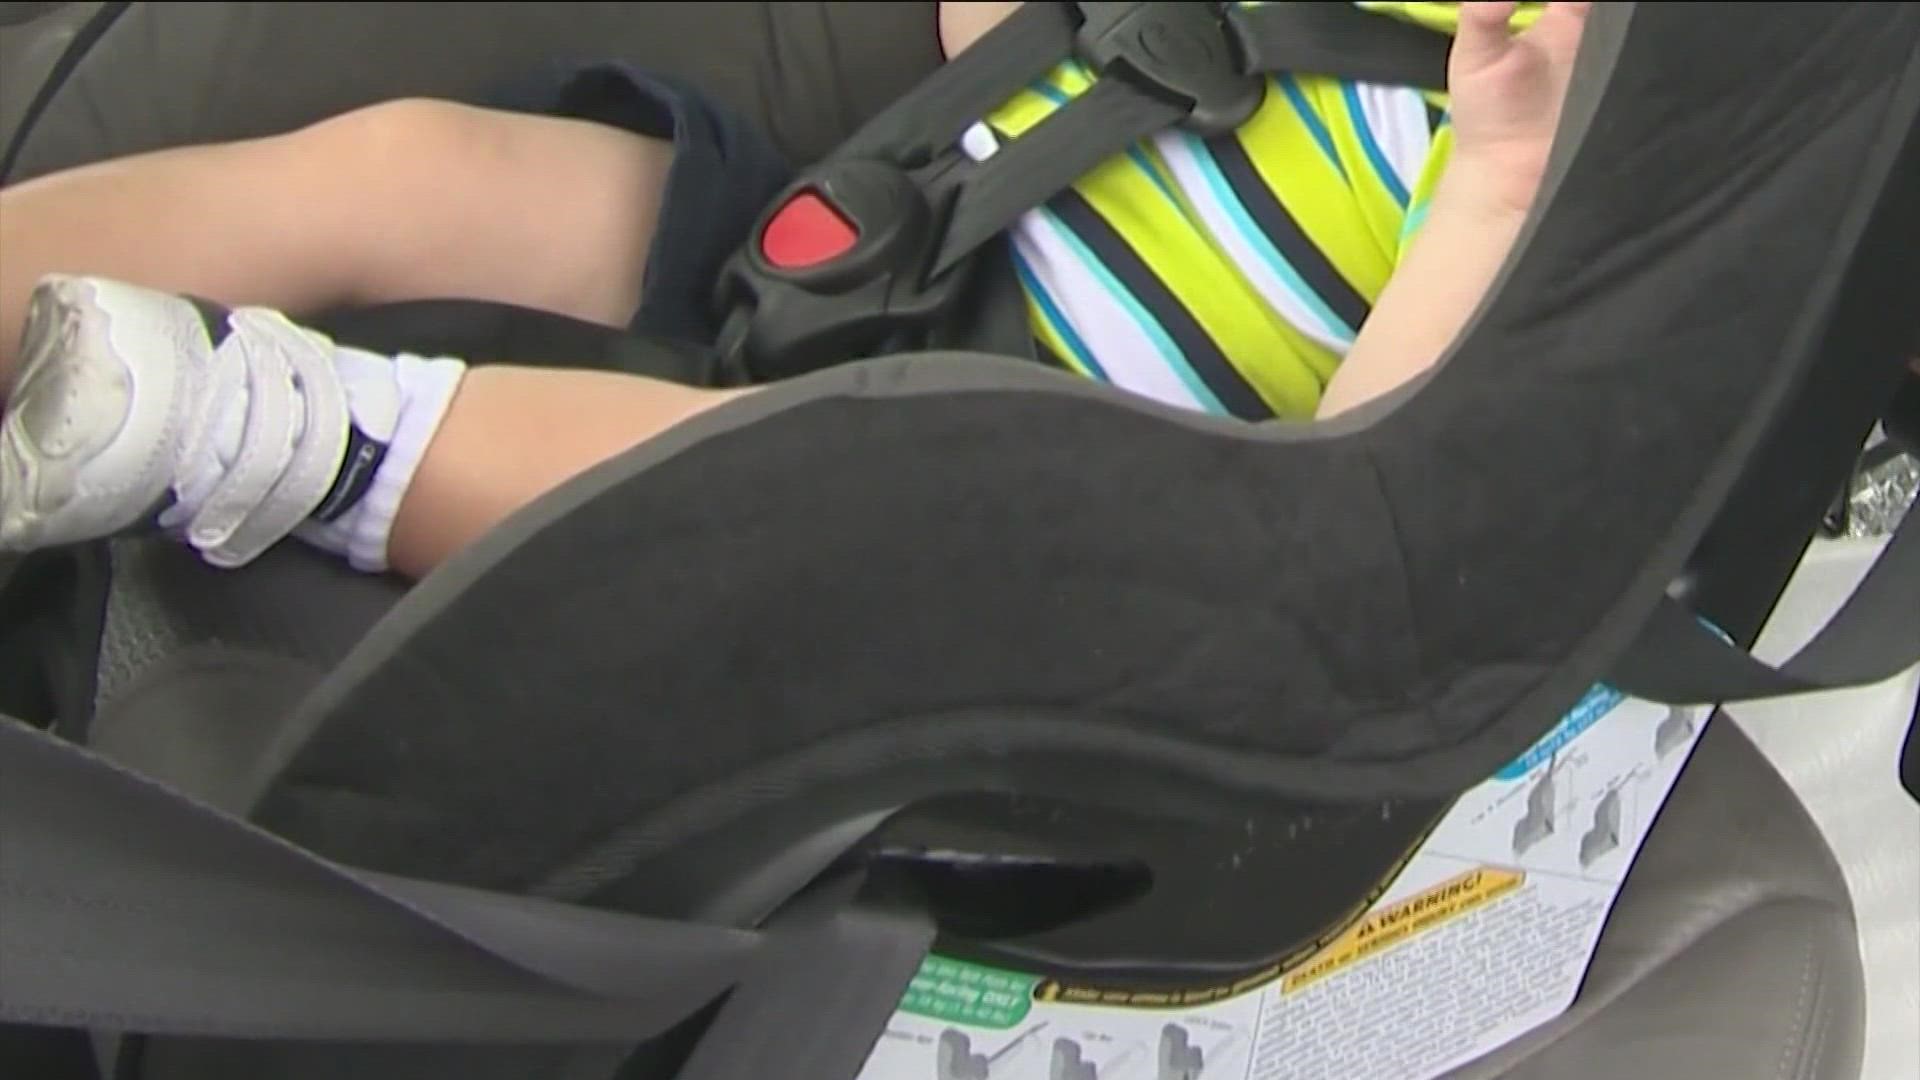 Five kids in the U.S. have died this year after being left in a hot car according to the Department of Transportation.